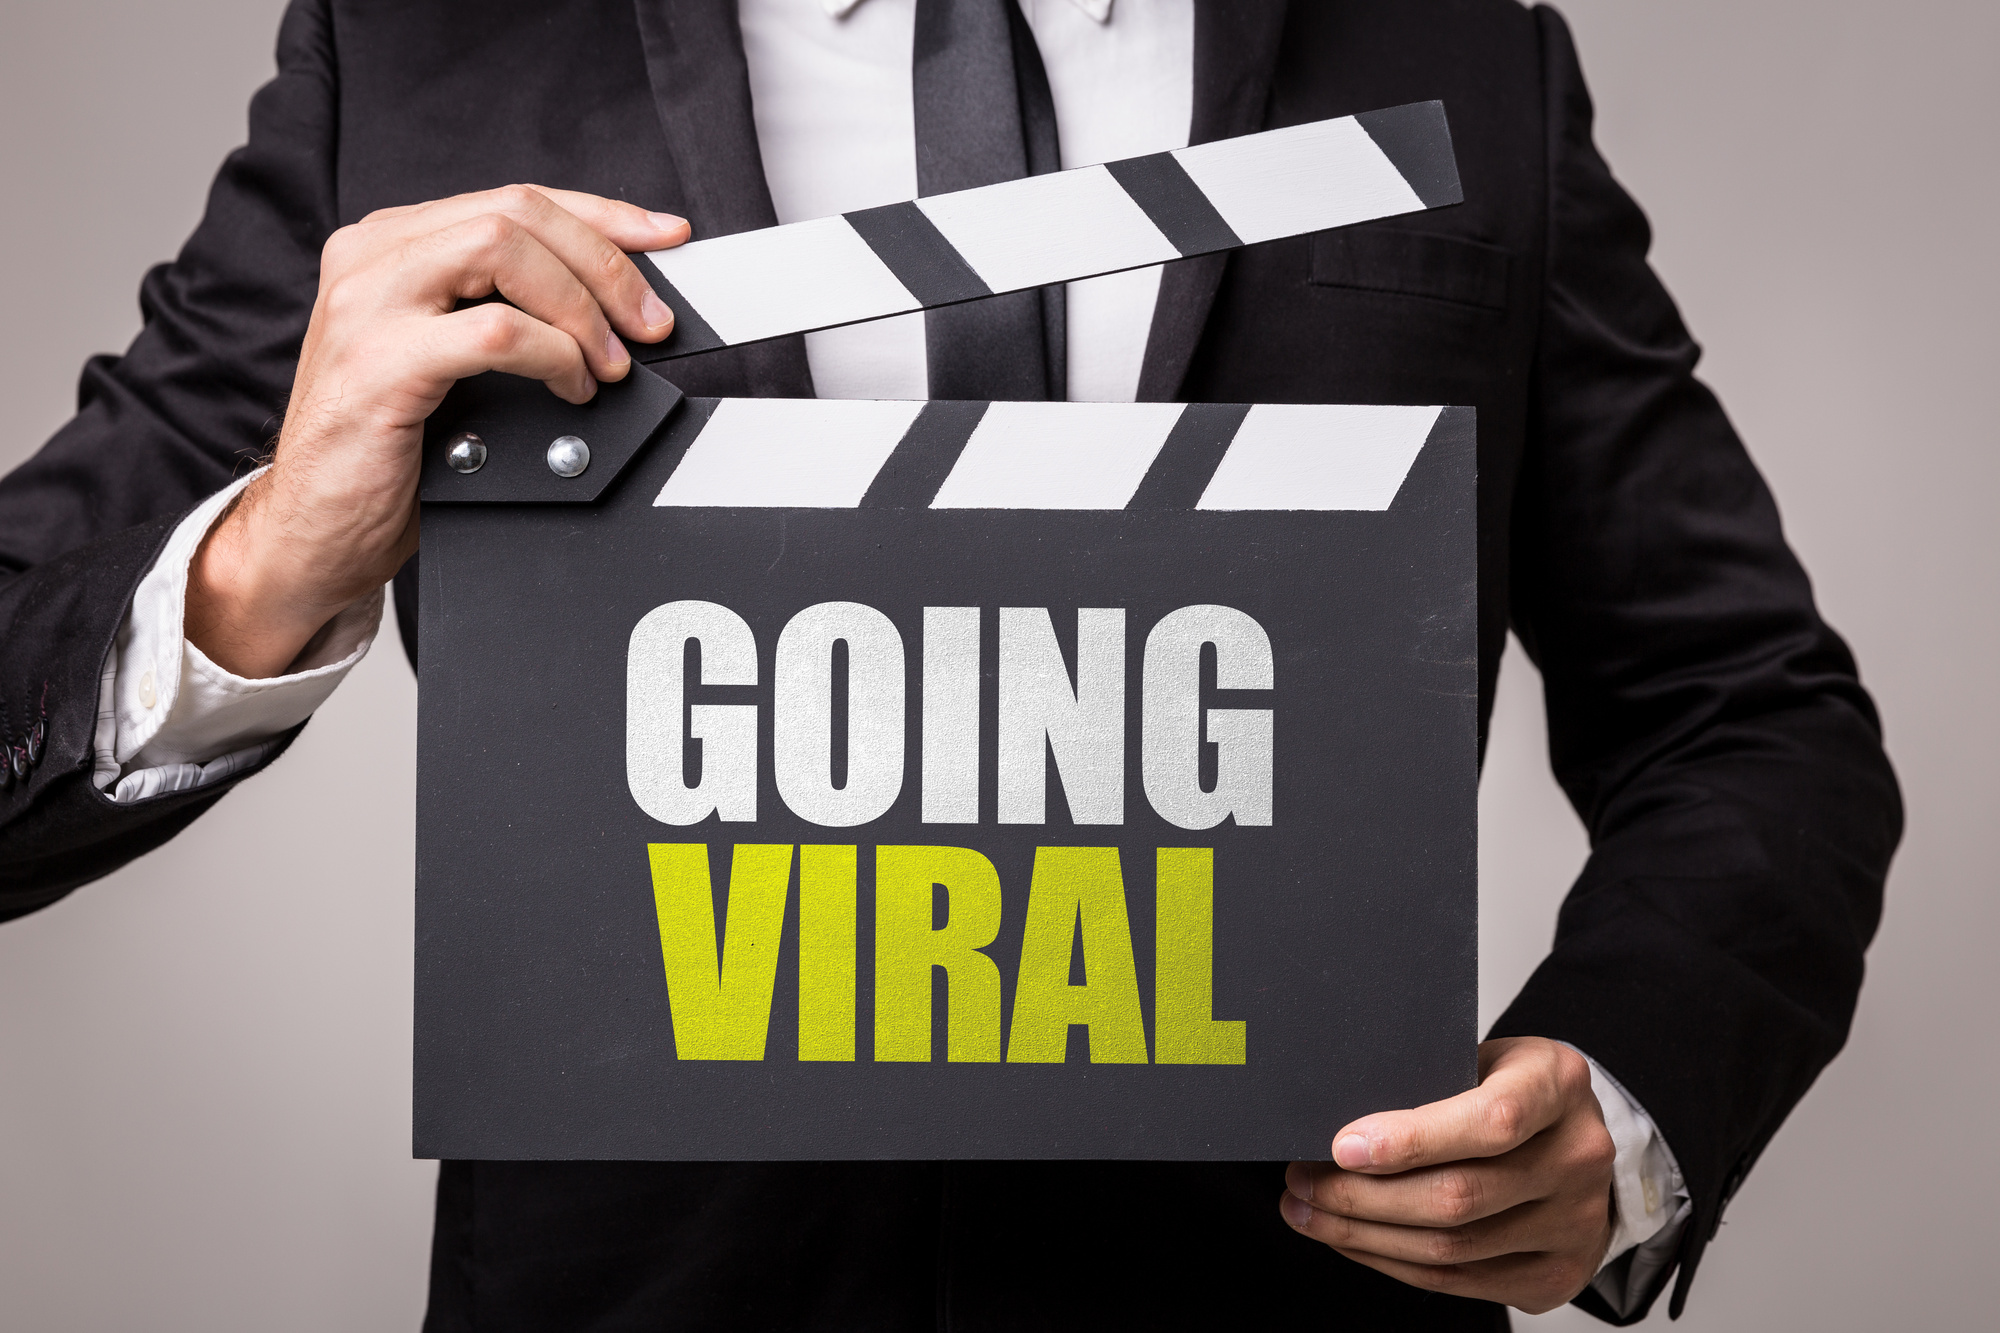 Start Going Viral: 7 Ways to Attract Thousands